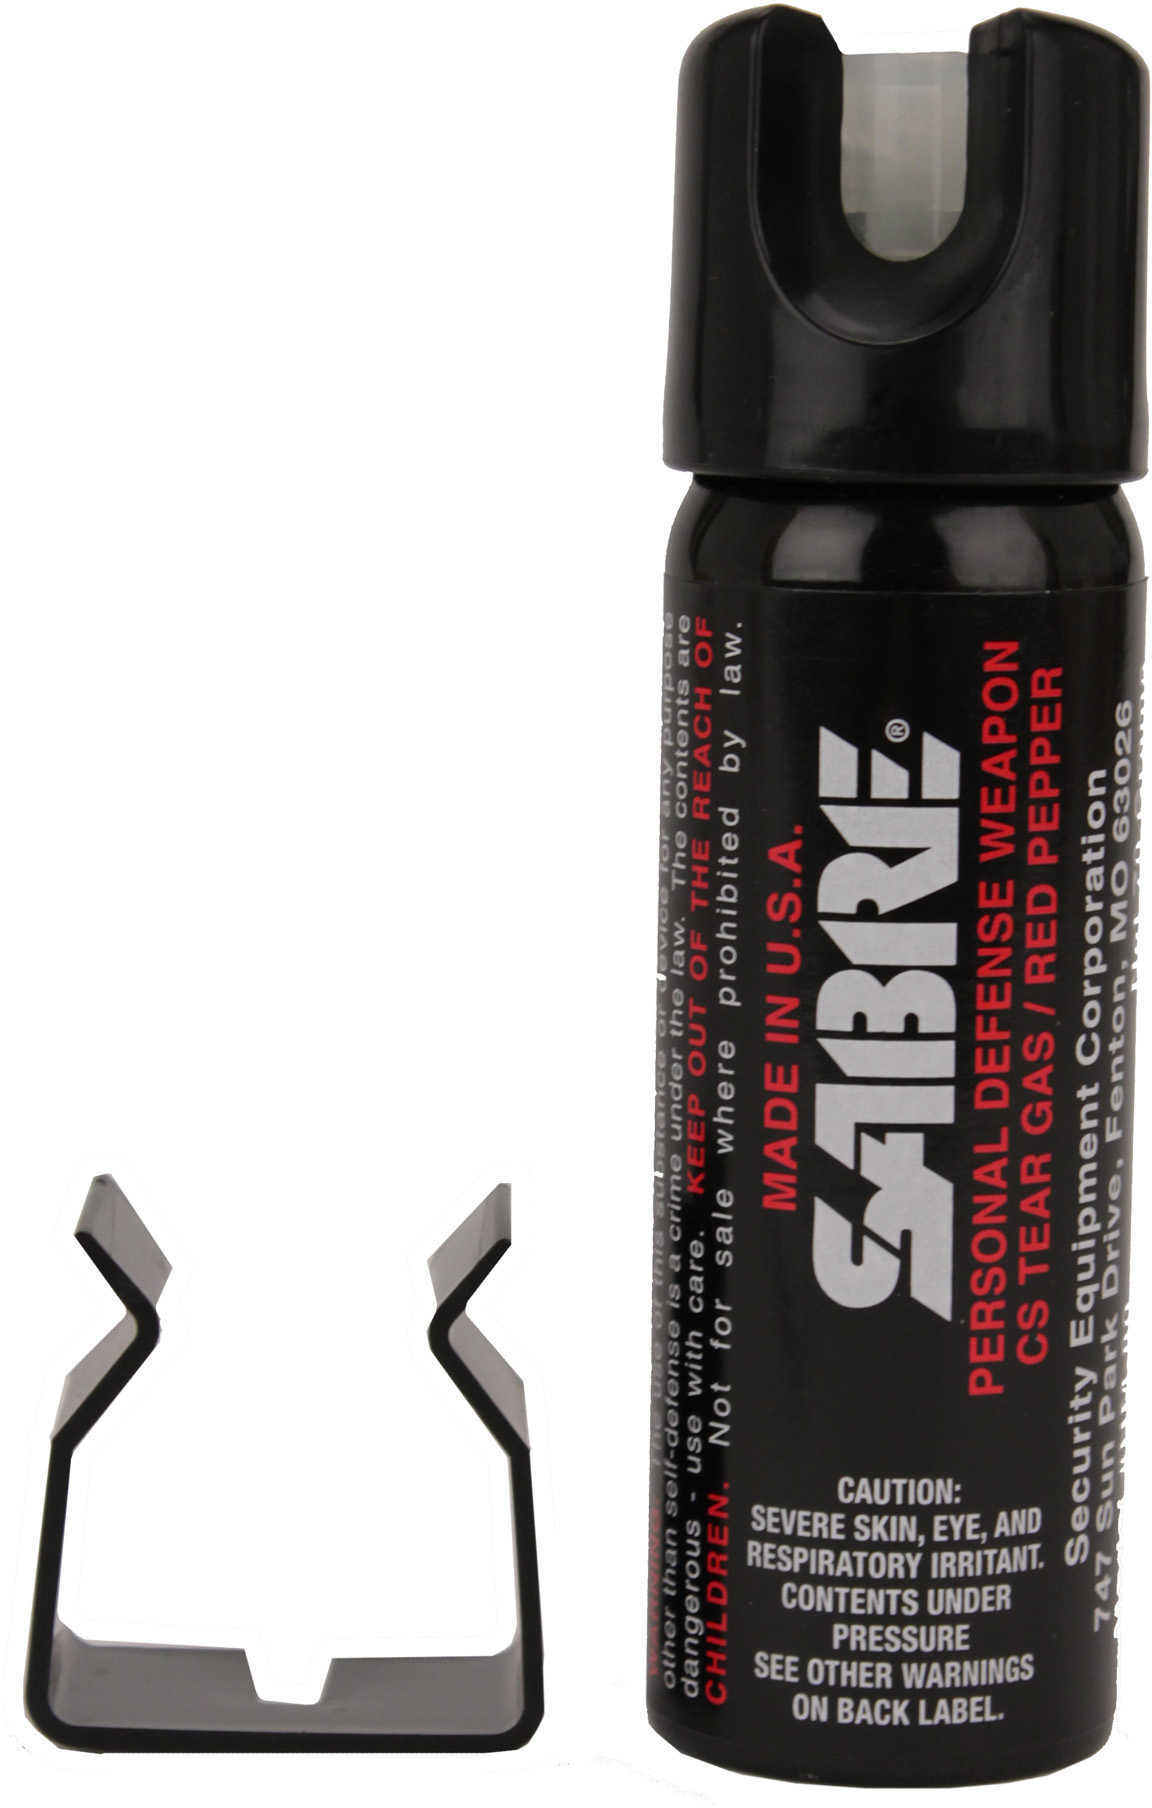 Sabre 3-In-1 Self Defense Spray Home Unit With Glow-In-The-Dark Safety And Wall Mount Clip Red Pepper, Cs Military Tear